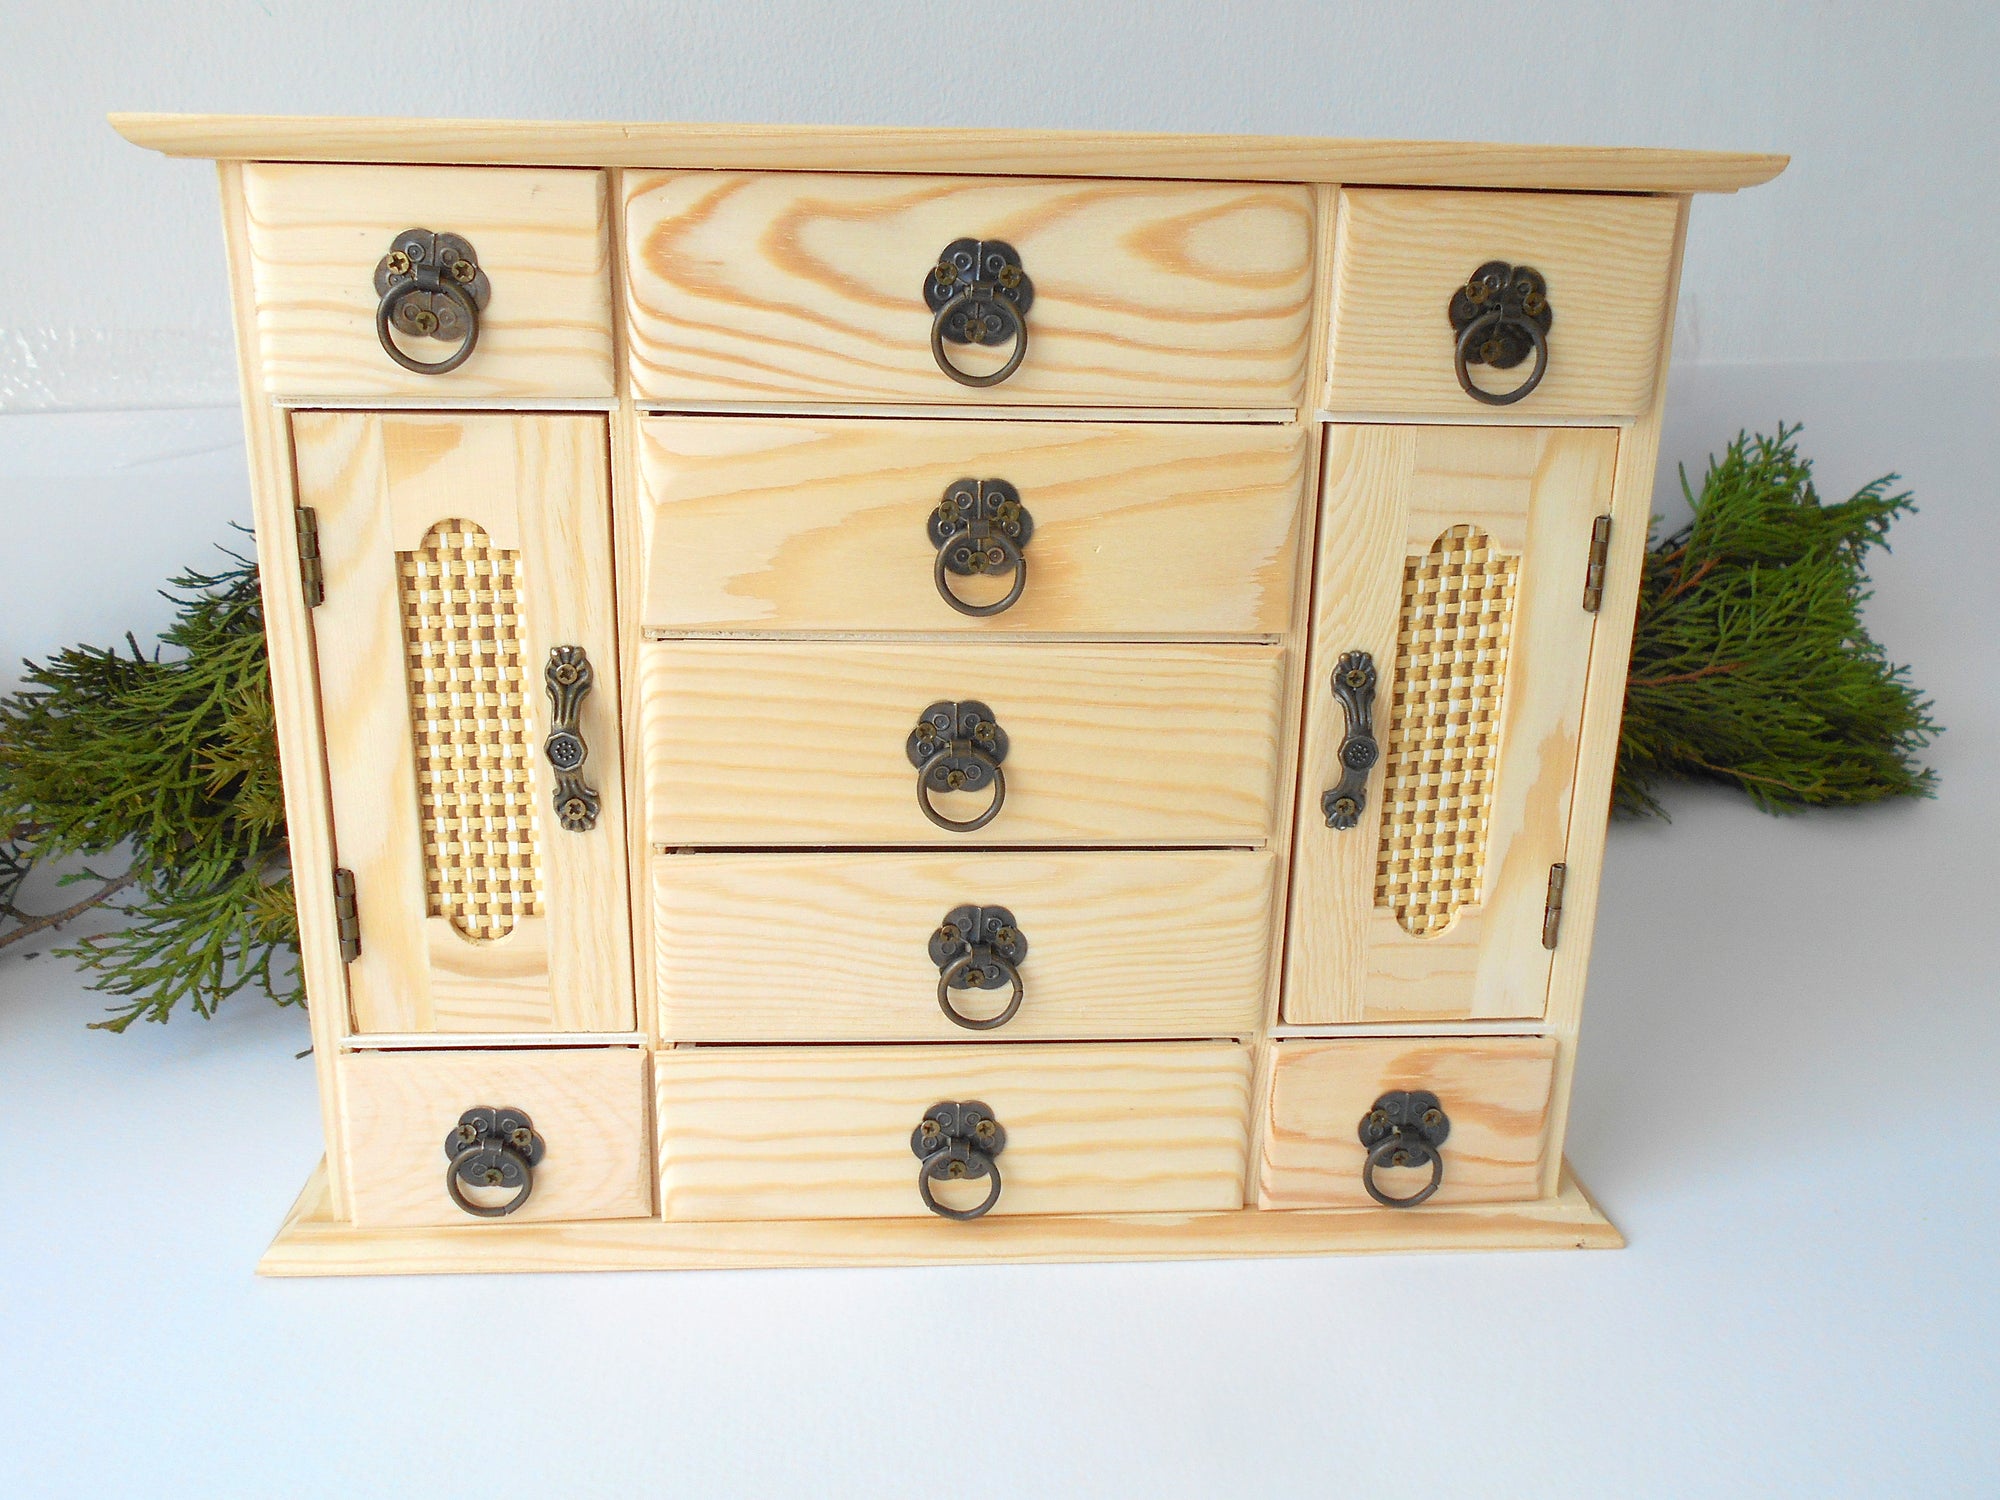 This wooden box with 9 drawers and 2 wardrobe doors is made of pinewood on the outside and bamboo wood for the inside of the drawers. It has metal pulls with a vintage bronze color. The surface of the box is smooth and refined with sanding paper. The color of the box is plain pinewood color.&nbsp;